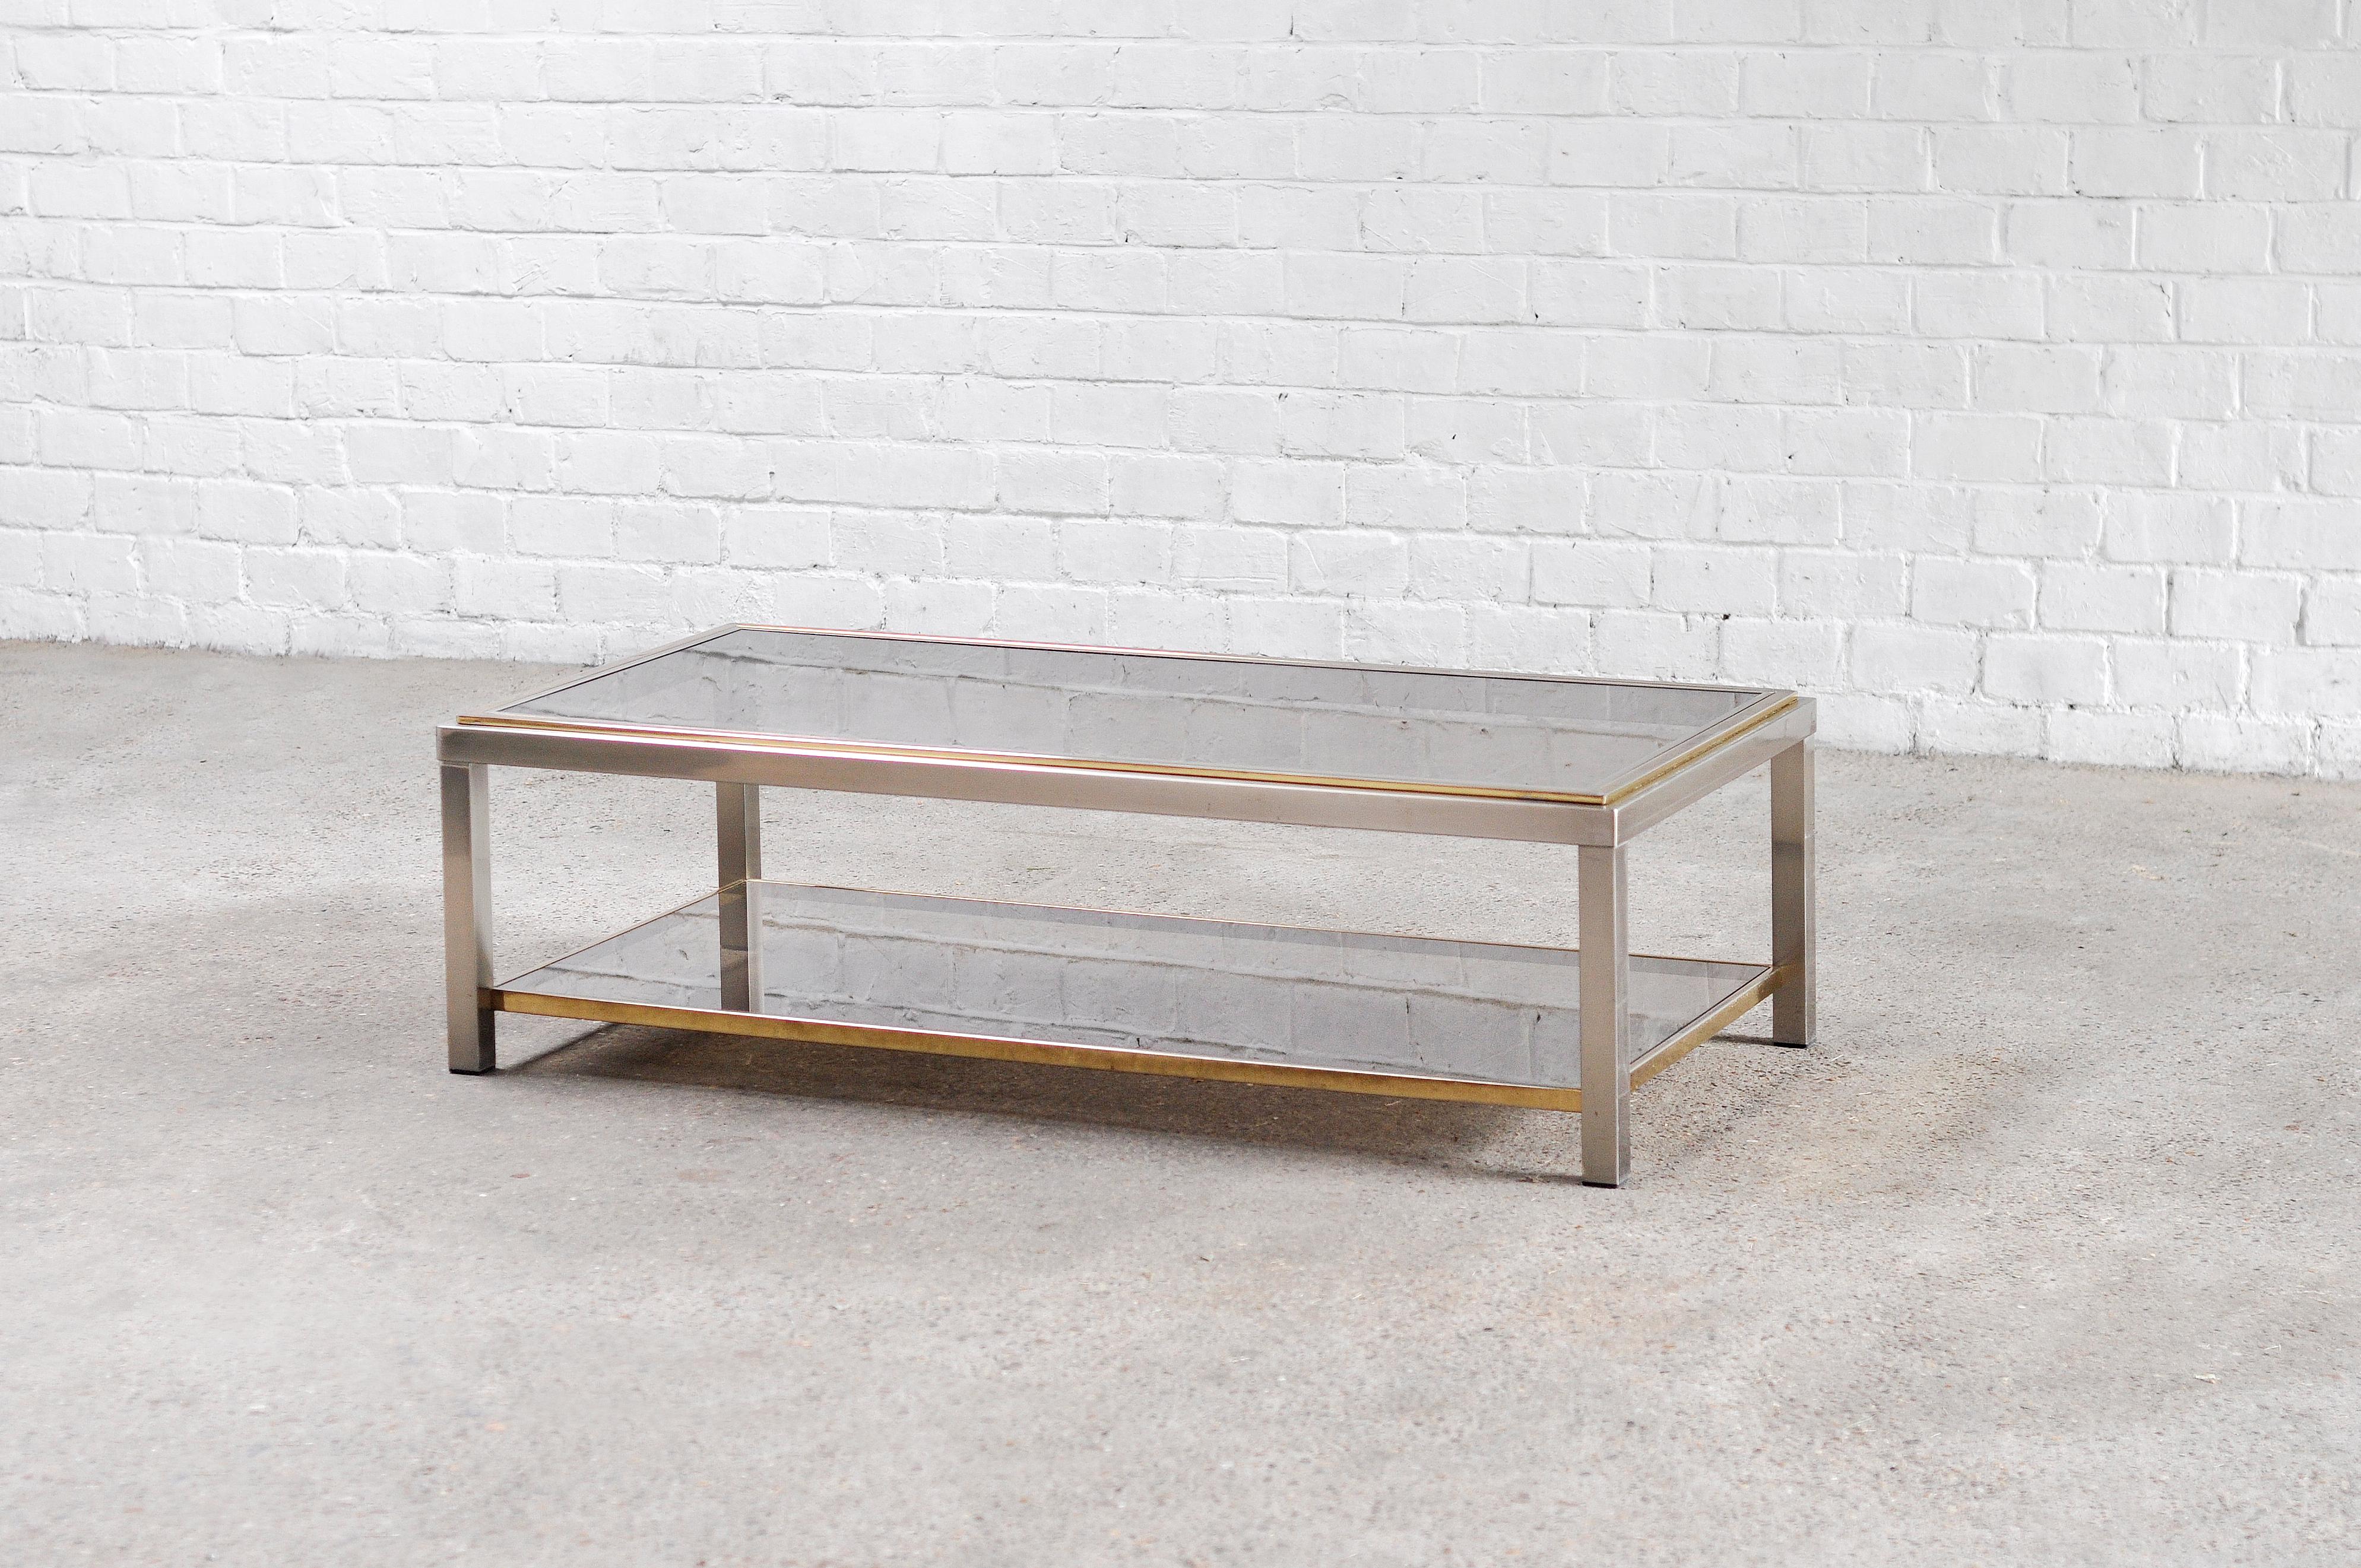 A chic two-tier coffee table in chromed metal with solid brass details and smoked glass shelves. Model 'Flaminia'. The two tier setup is great for displaying books or other objects.
In good vintage condition, with normal signs of age and use.